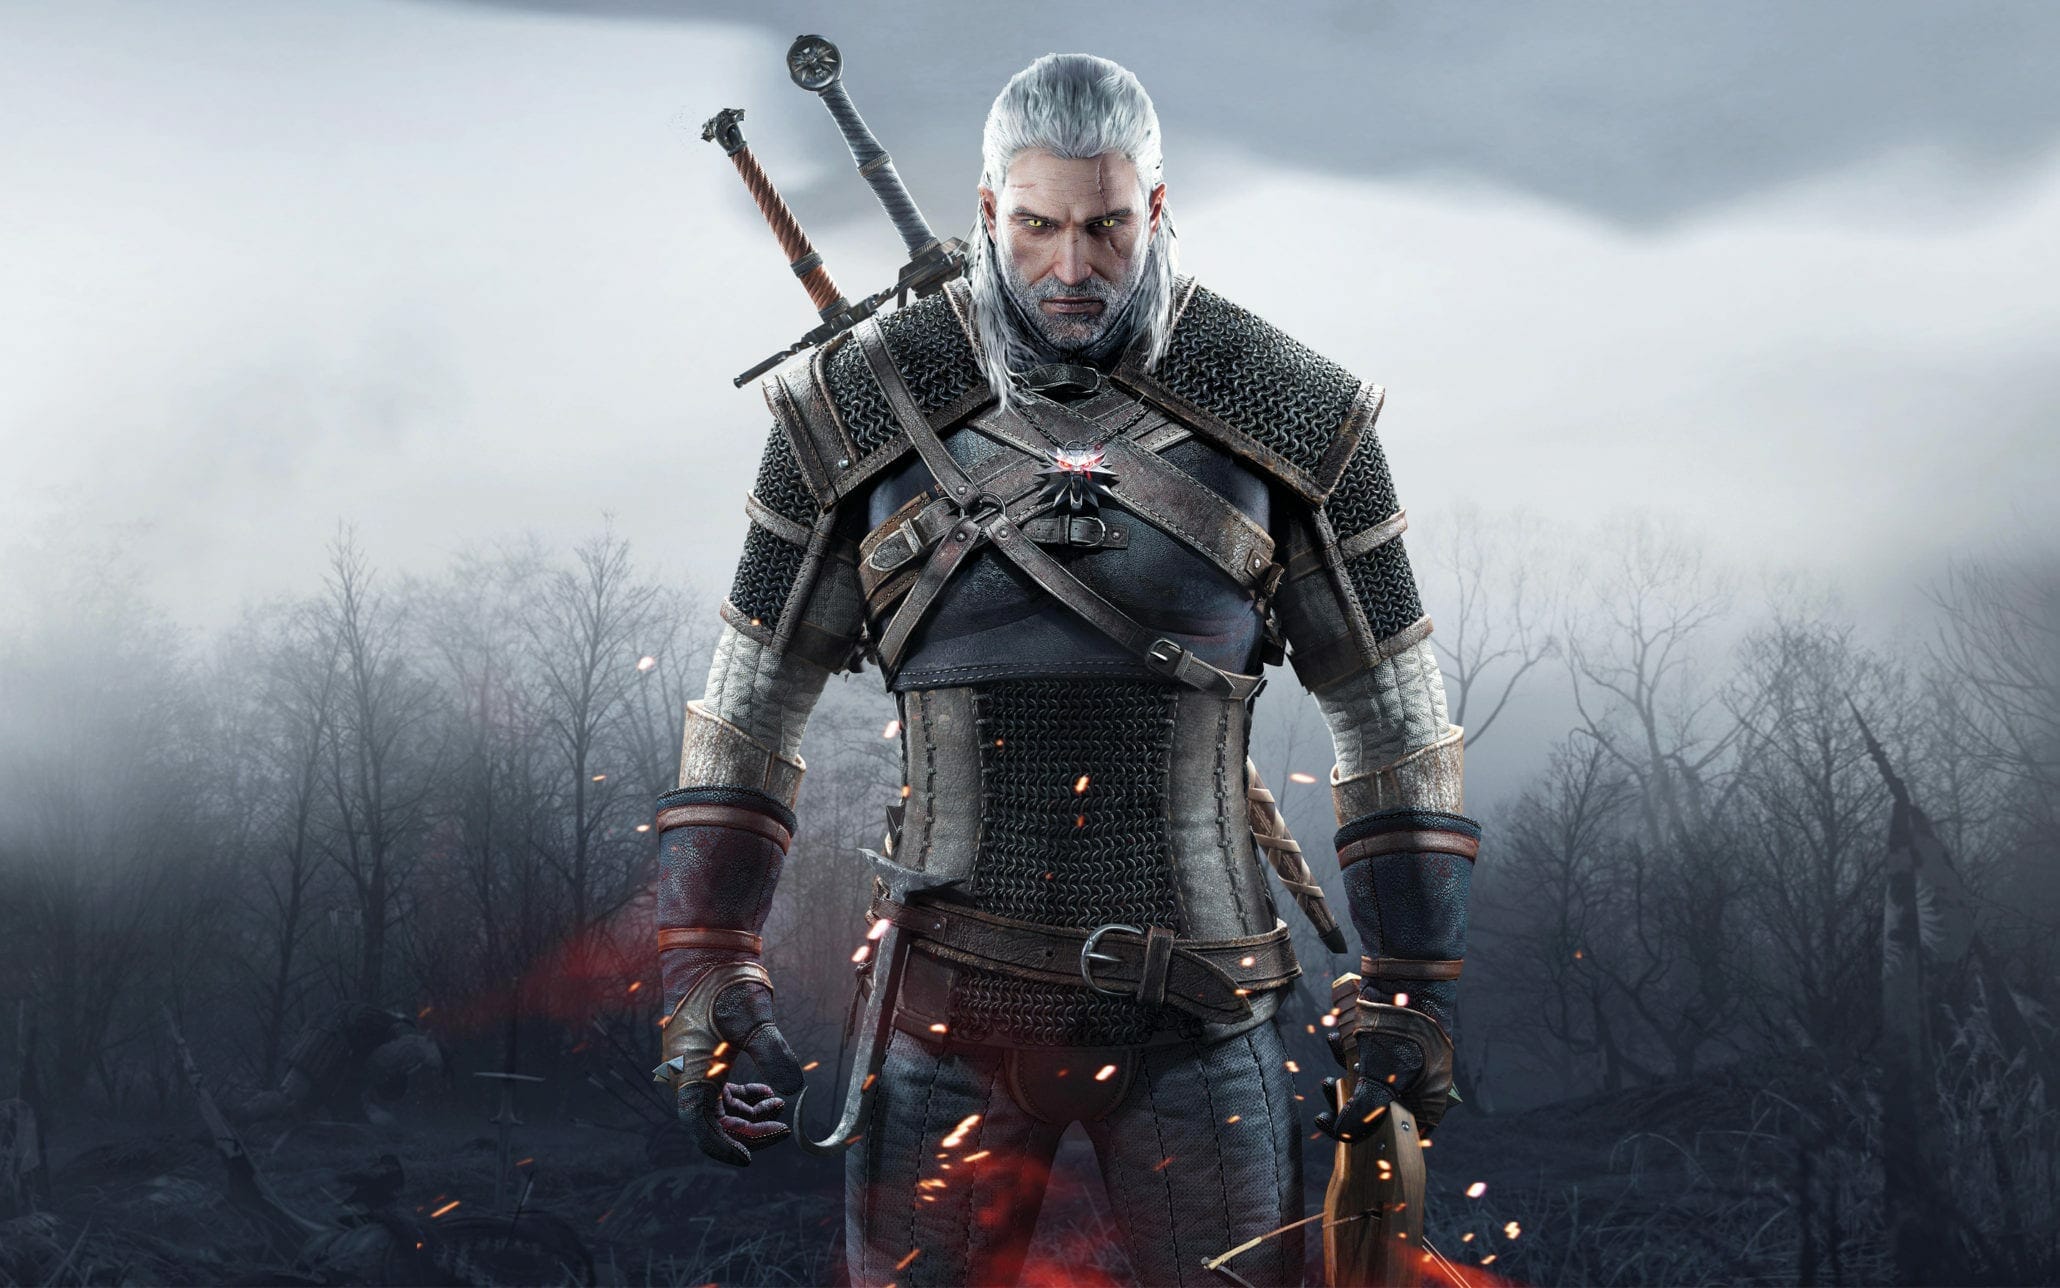 Witcher 3 for Xbox Game Pass